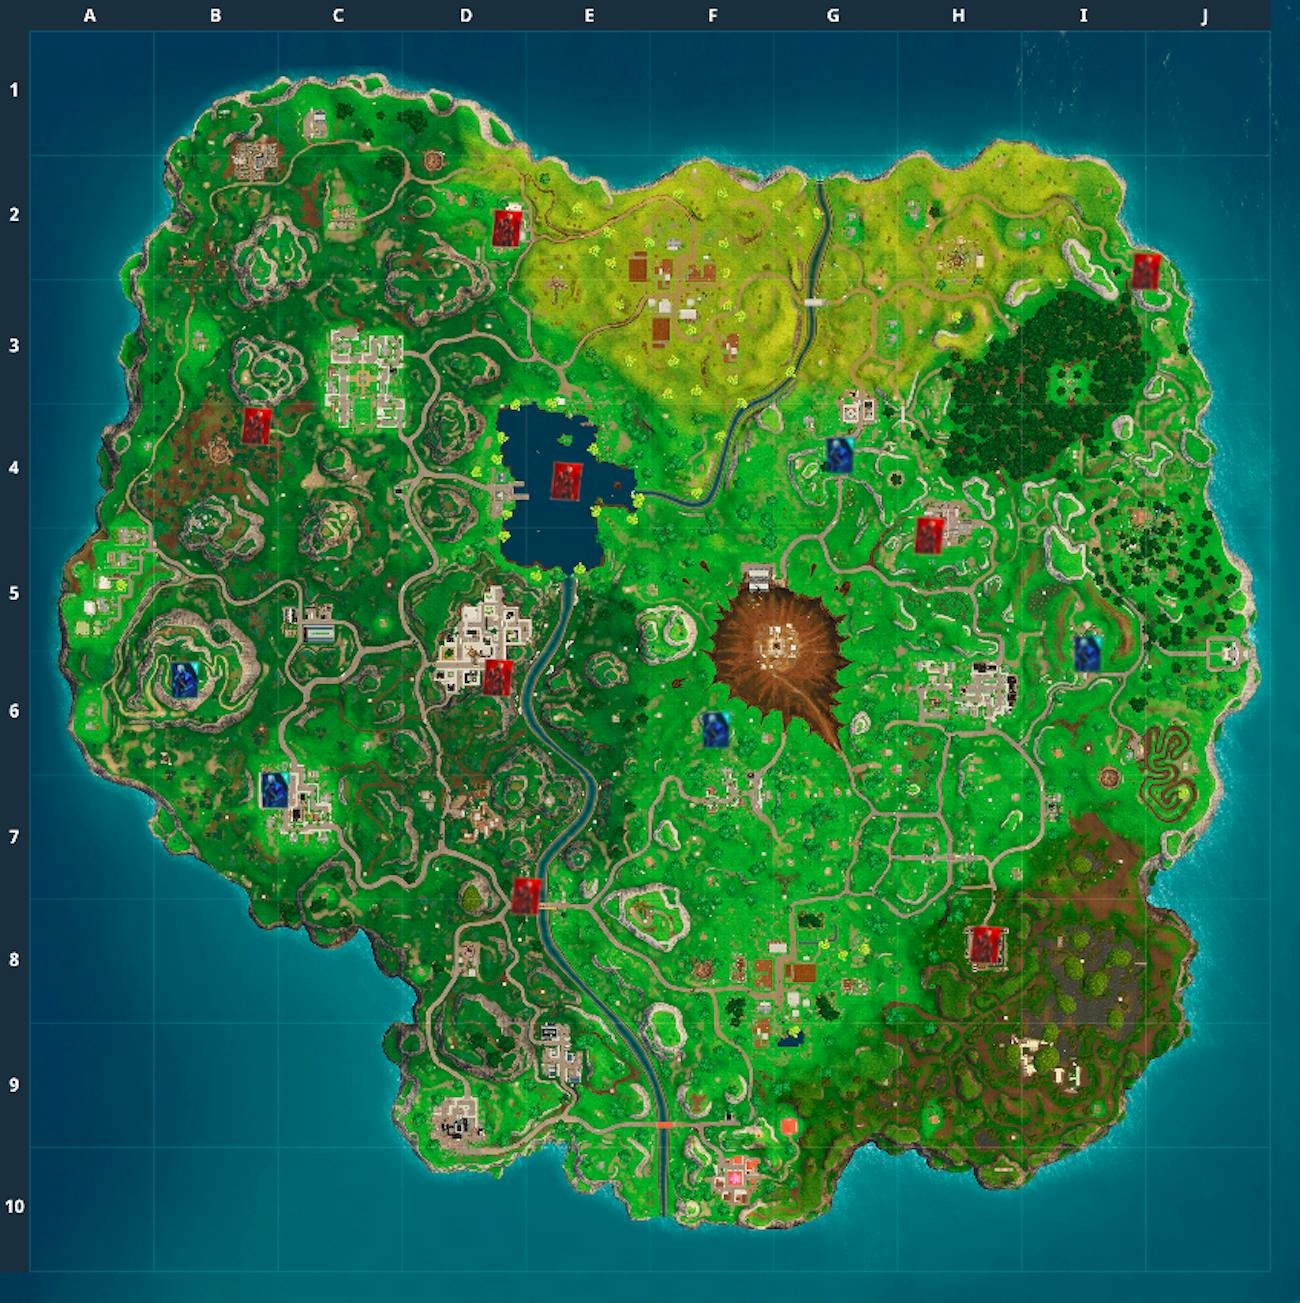 the fortnite week 6 challenge has you spray paint over posters at these locations - fortnite season 6 poster